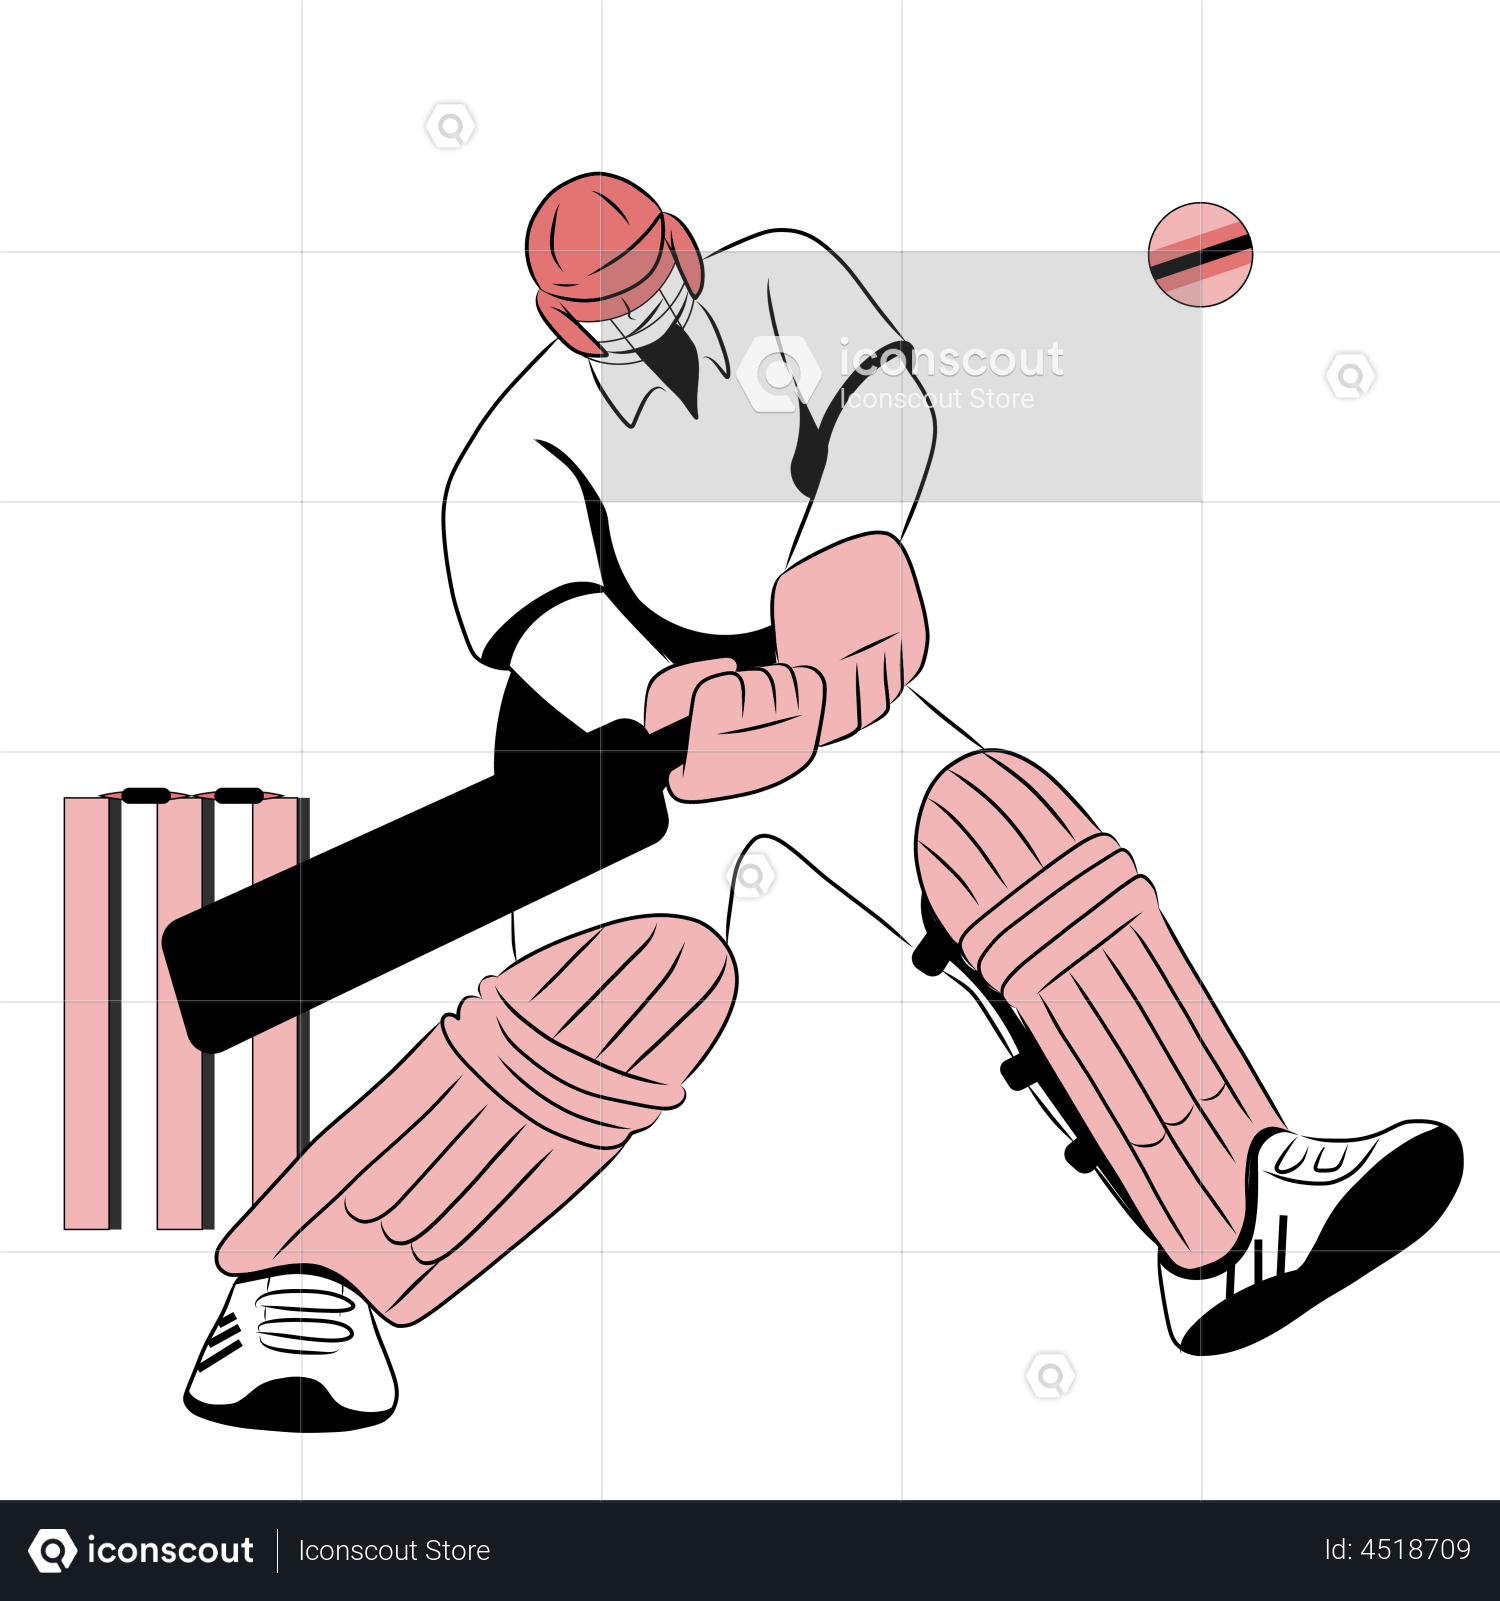 Cute Boy Plays Cricket coloring page - Download, Print or Color Online for  Free